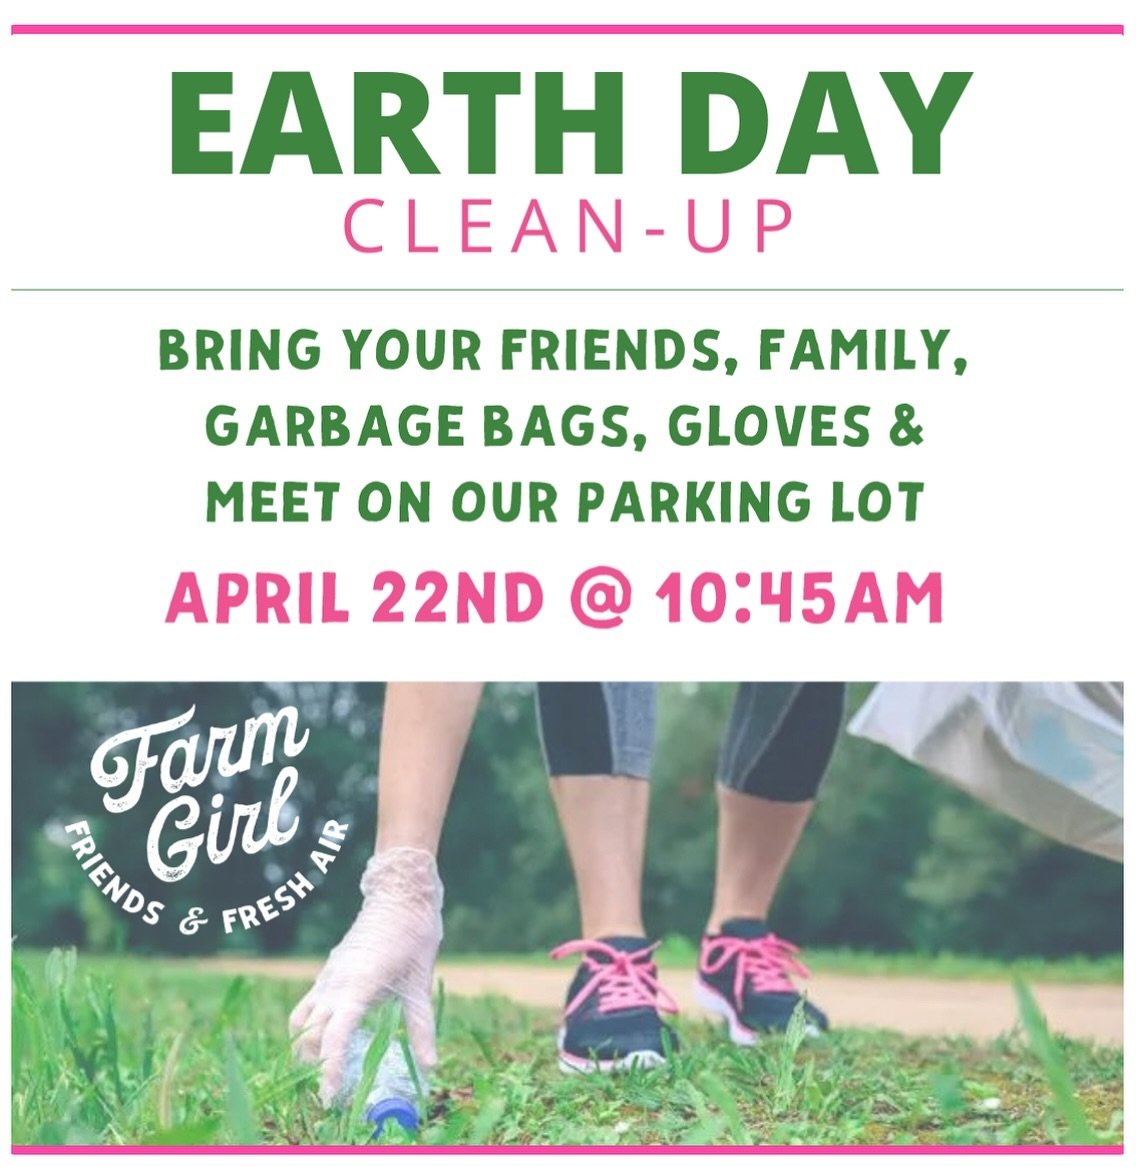 Join us for a 2.5km, 5km or 7km walk along our road of Third Line on Monday April 22 as we clean up our road in honour of earth day. 

No need to register, just meet Coach Jessie in the parking lot. 

#FriendsAndFreshAir #farmgirlfitness #farmgirlstr